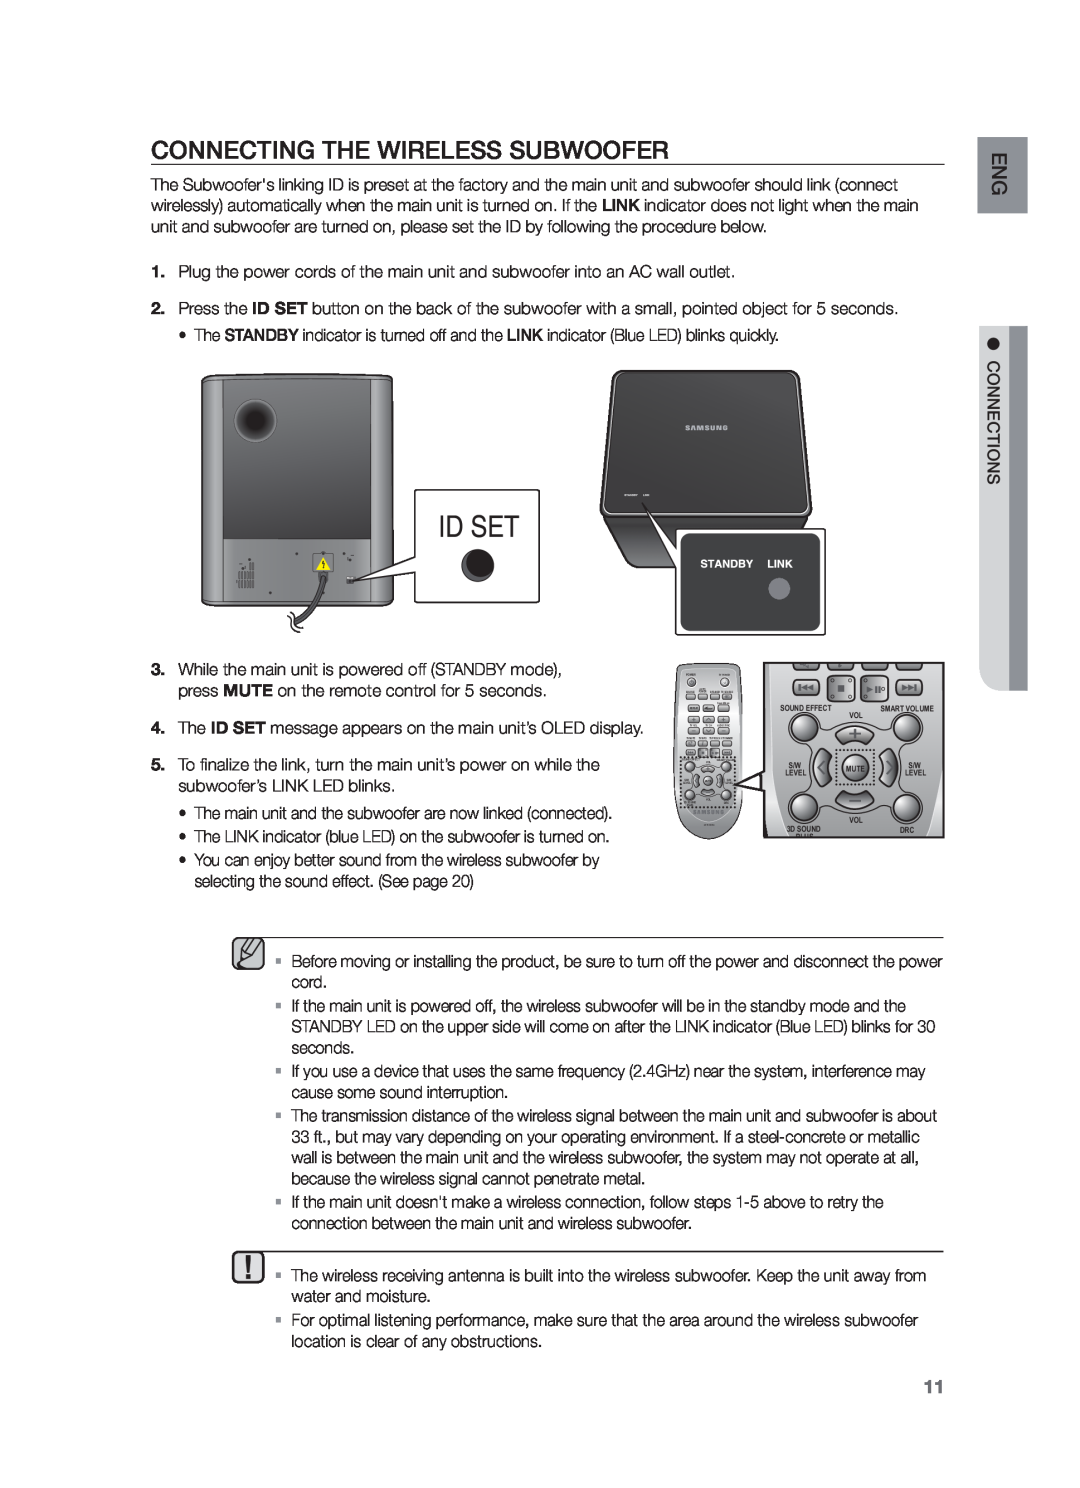 Samsung HW-F751/EN, HW-F751/XN manual Connecting The Wireless Subwoofer, While the main unit is powered off STANDBY mode 